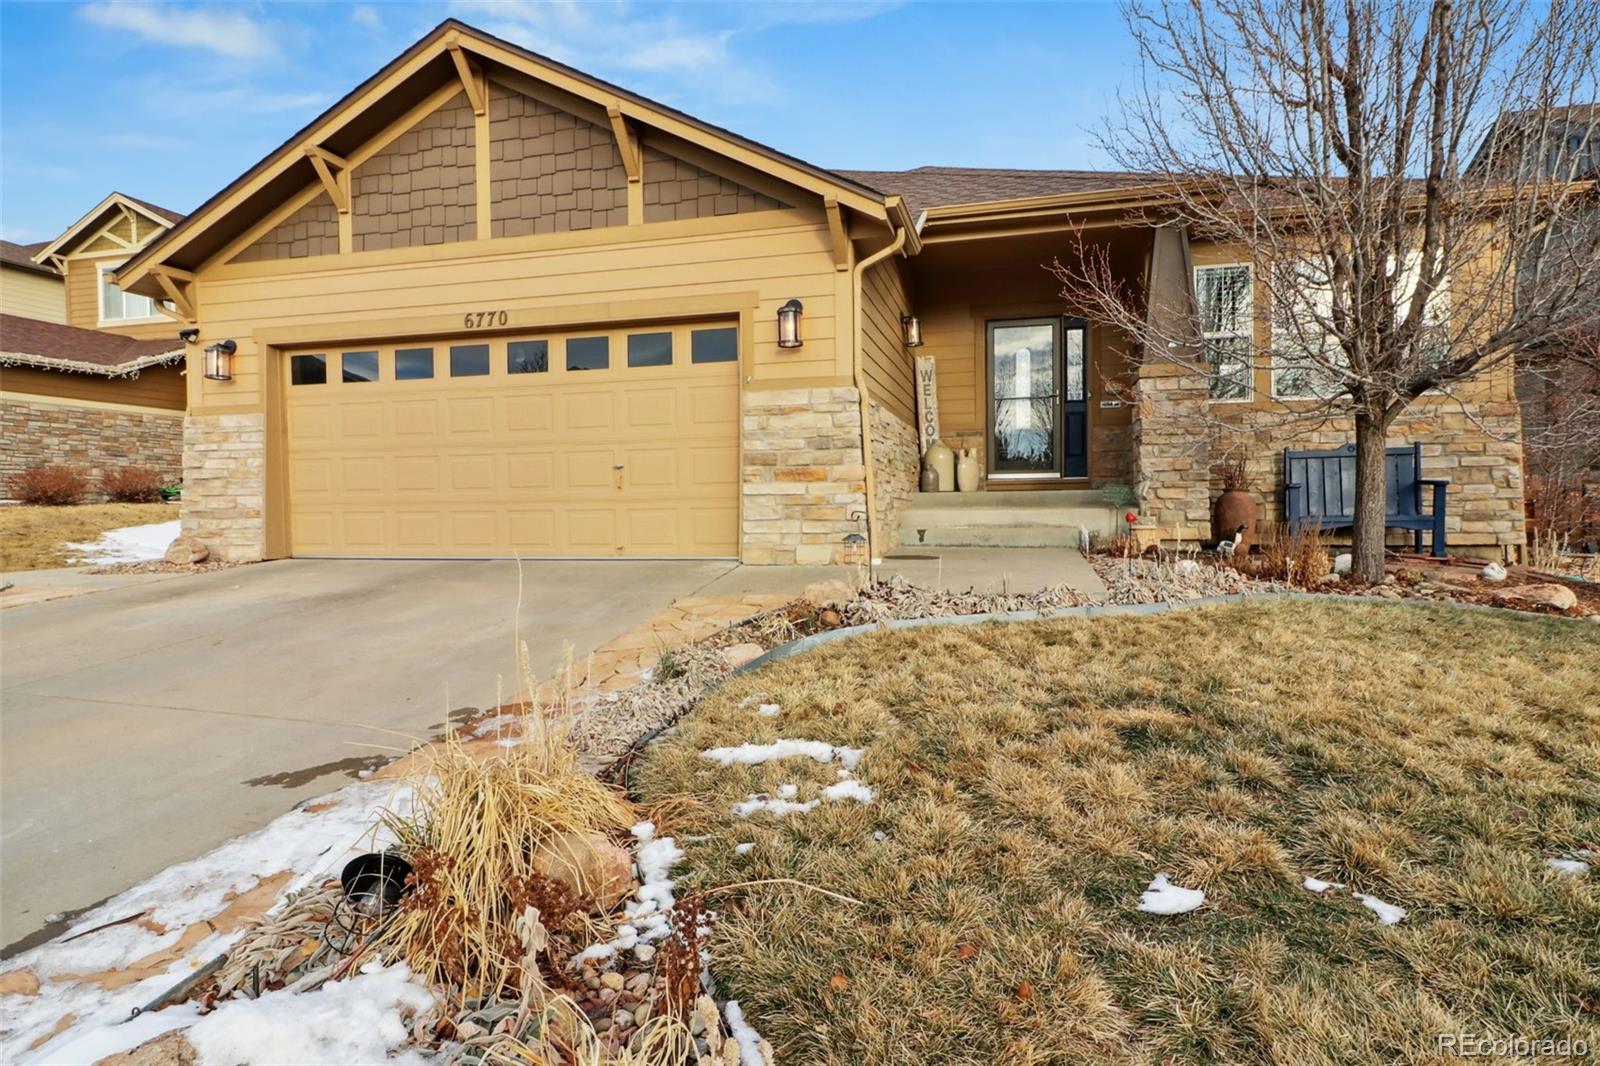 6770 s fultondale court, Aurora sold home. Closed on 2024-03-28 for $705,000.